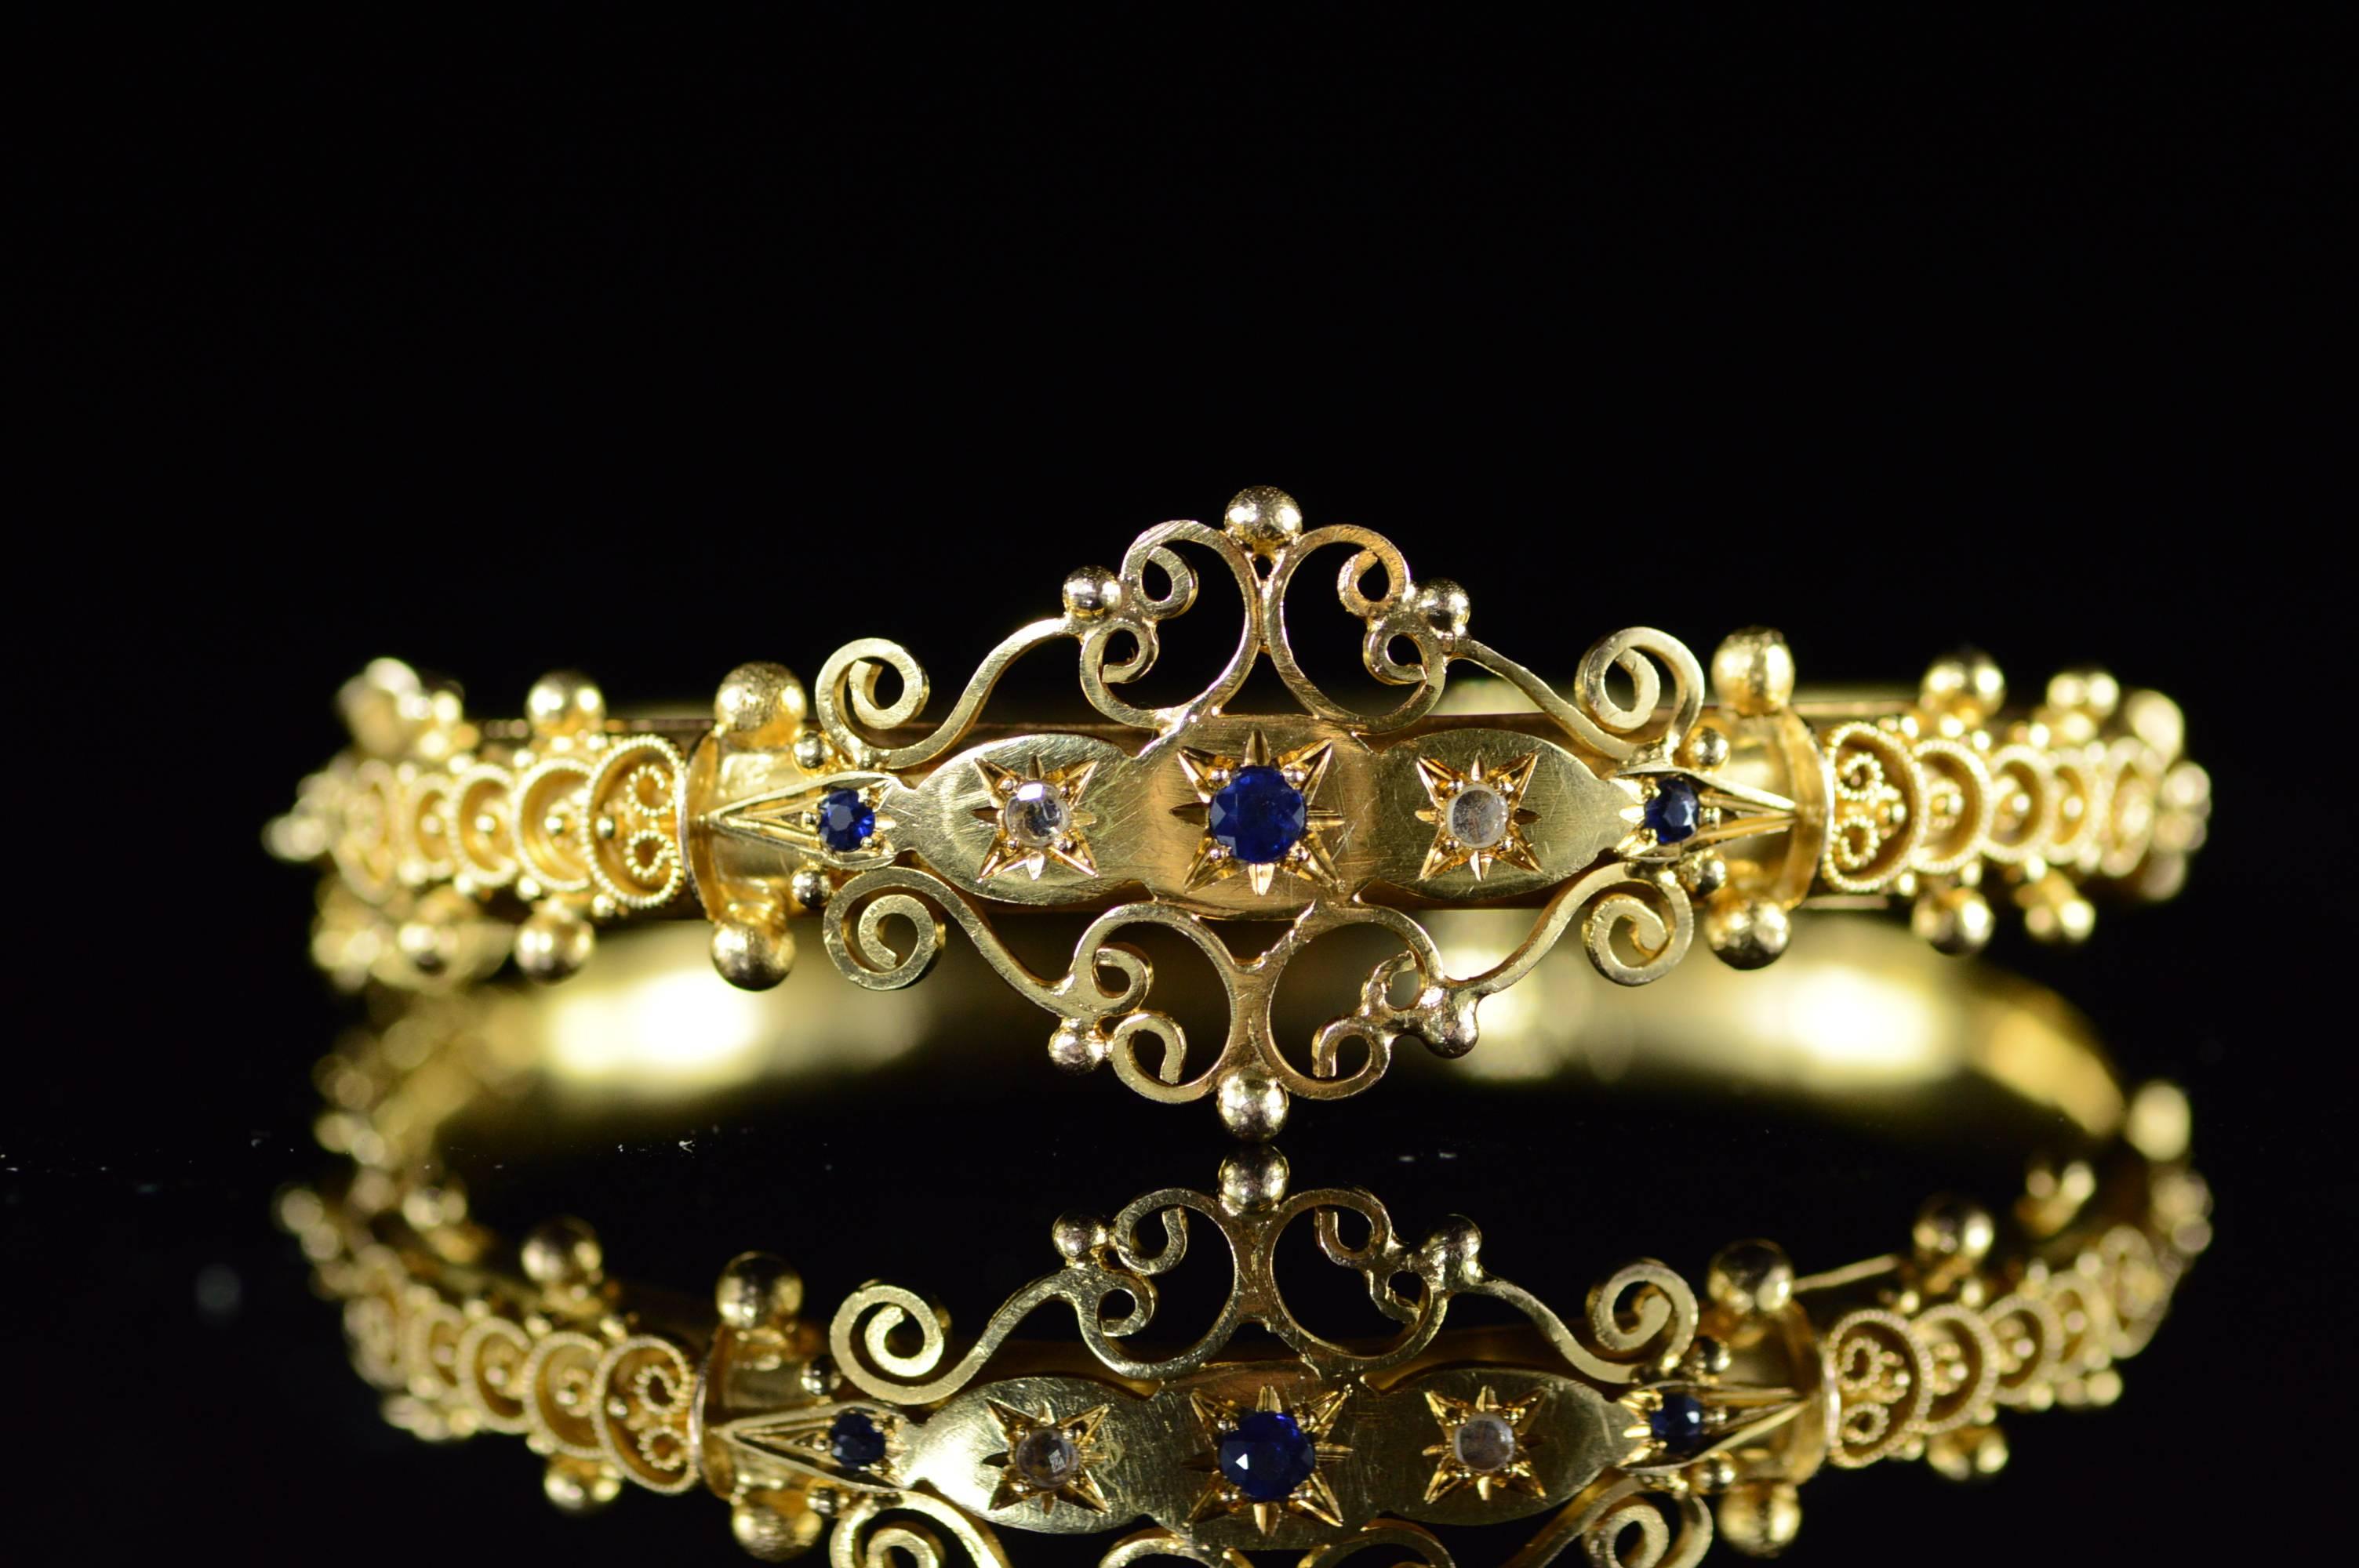 This beautiful bangle is hand constructed with beautiful filigree accents and is set with 0.35ct tw of Sapphires & Rose Cut Diamonds.

All diamonds are graded according to GIA grading standards.

·Item: 14K Victorian 0.35 CTW Sapphire & Rose Cut